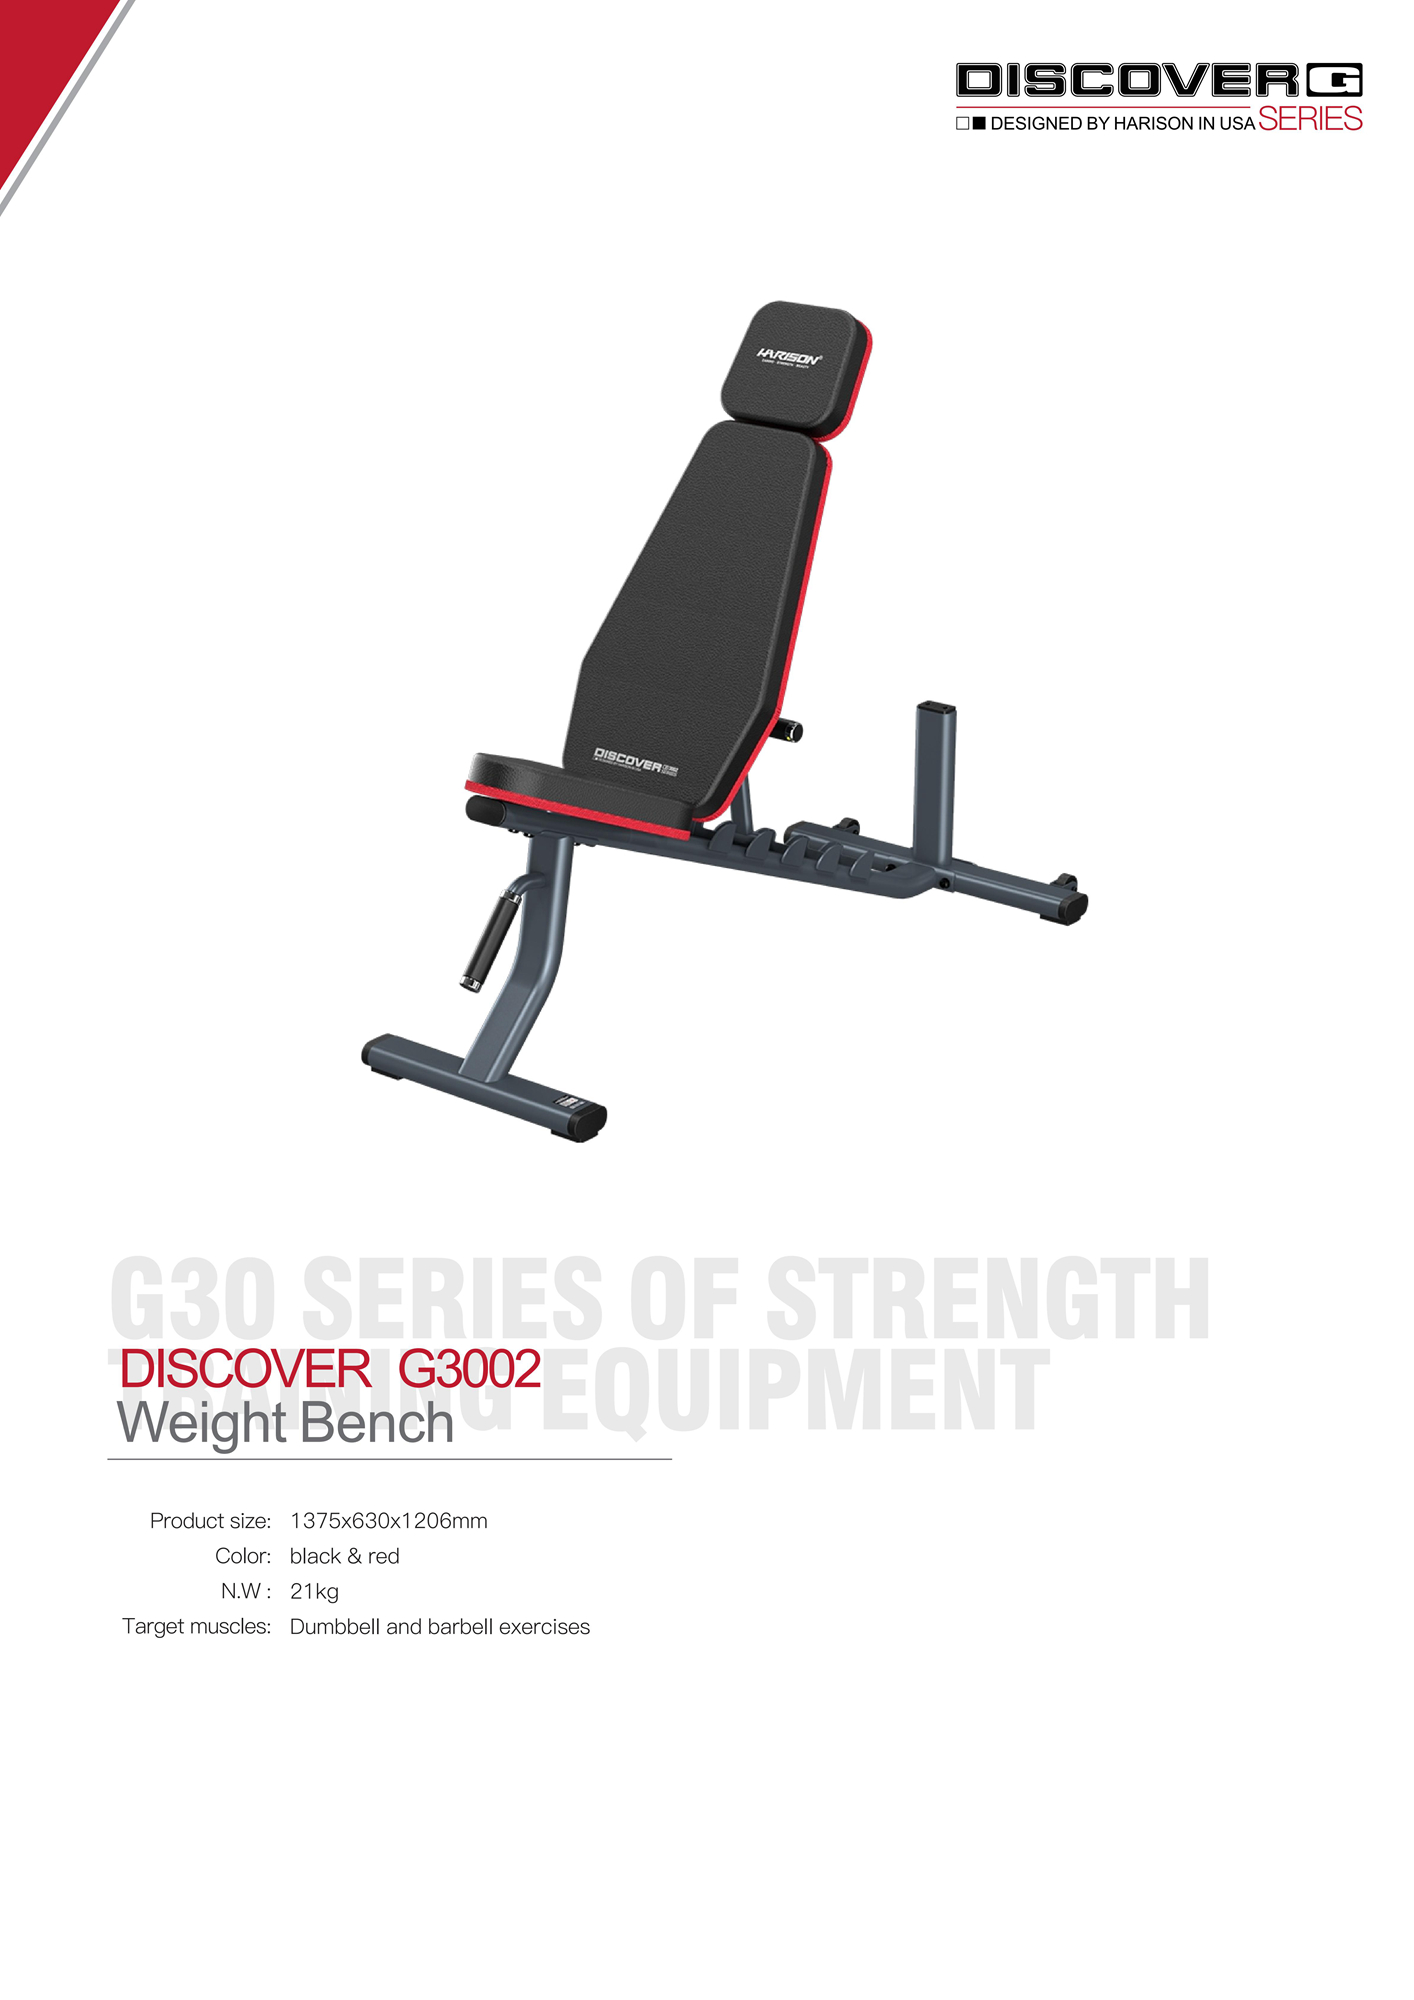 DISCOVER G3002 Weight Bench